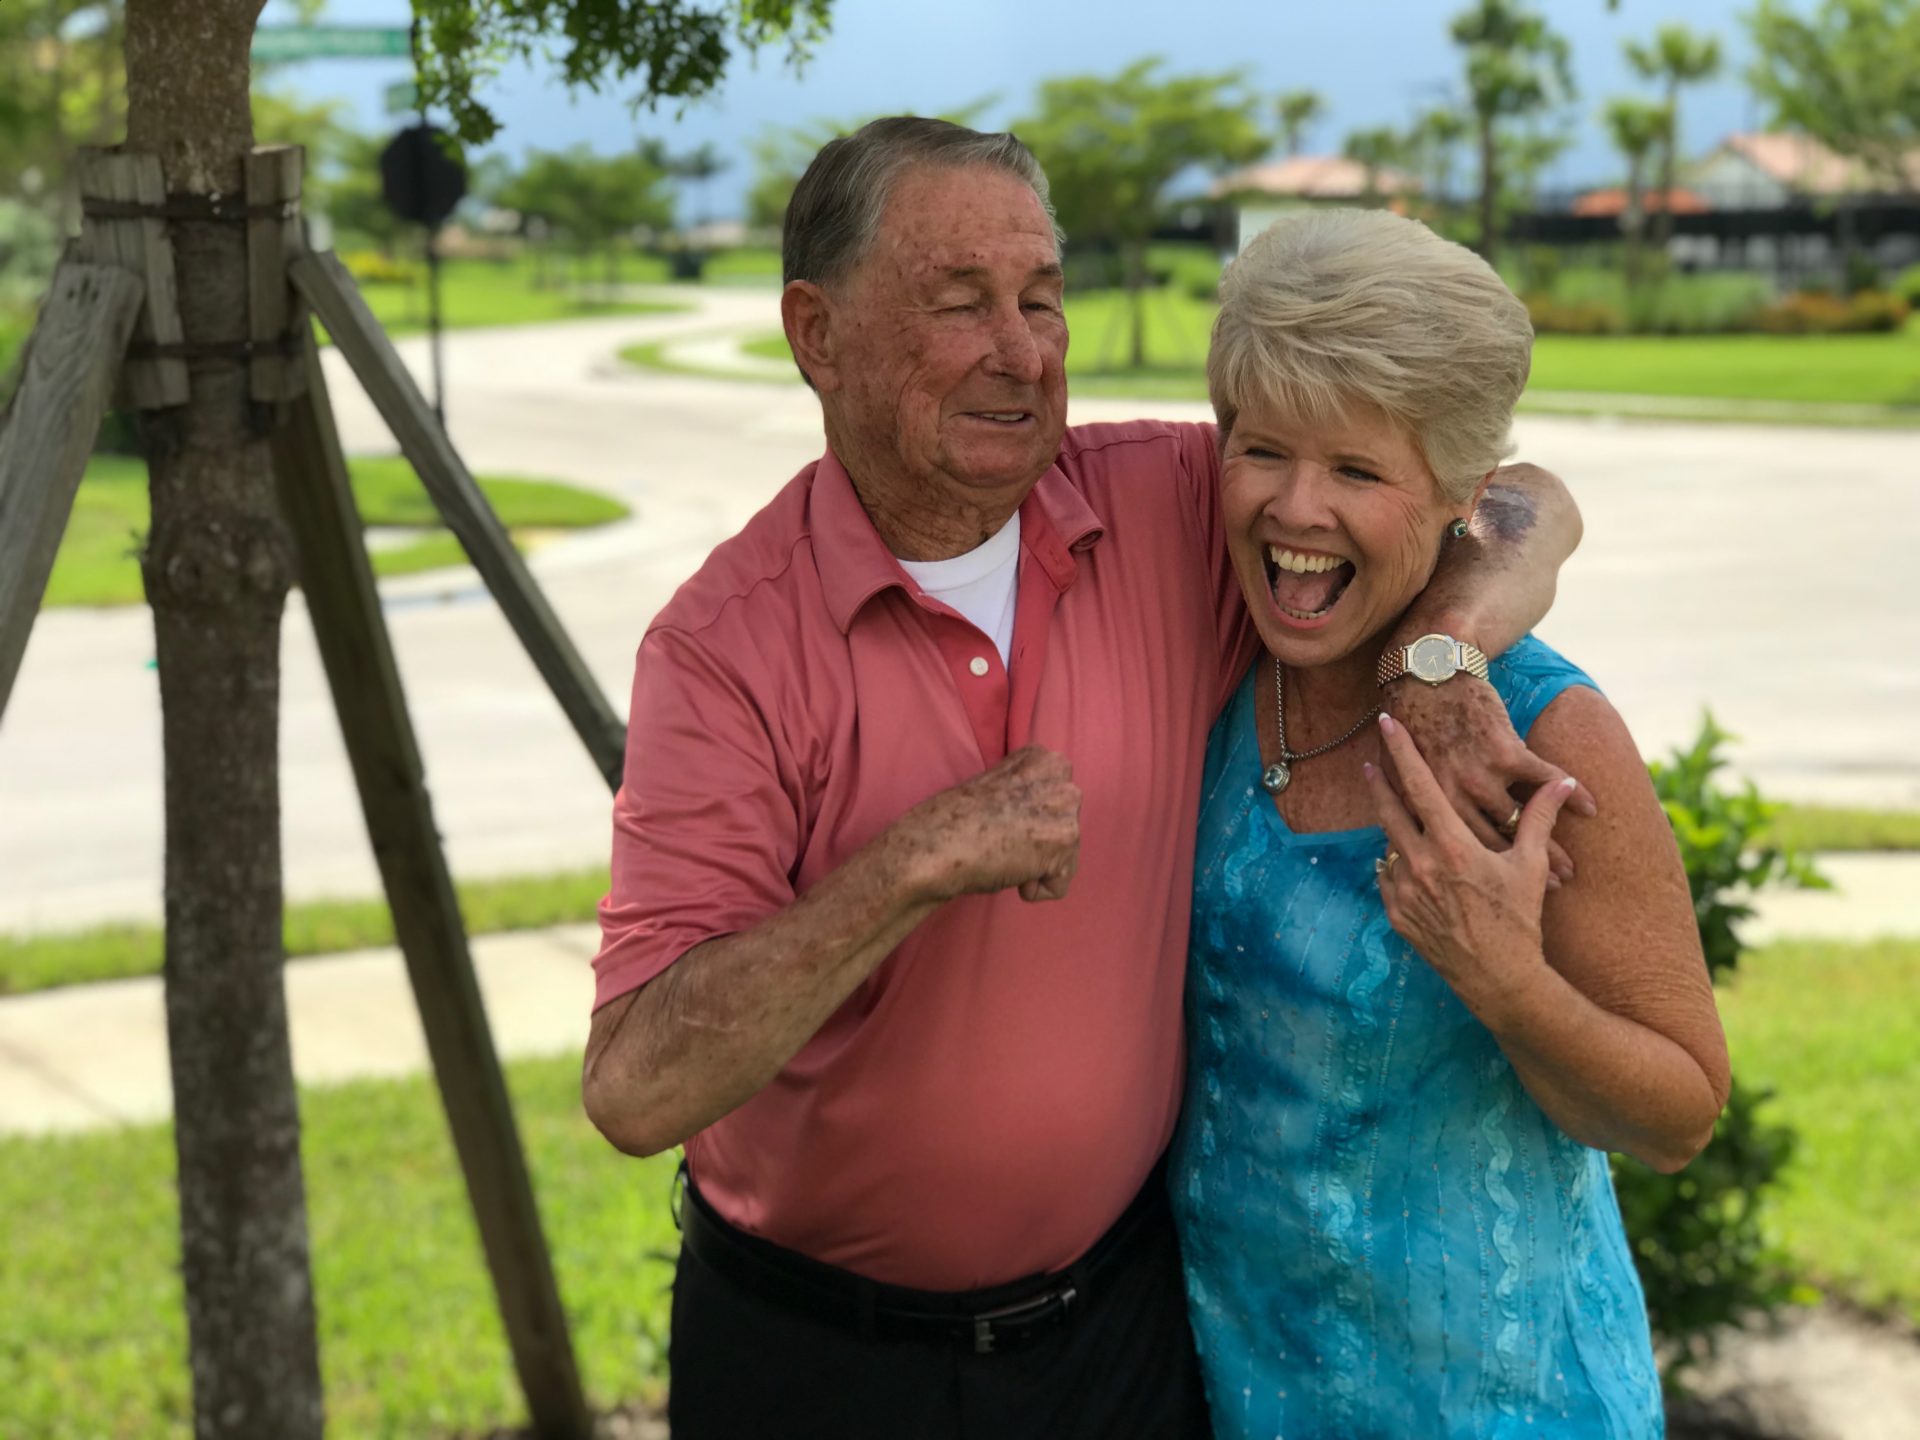 Diane & Mike - July 14th 2018